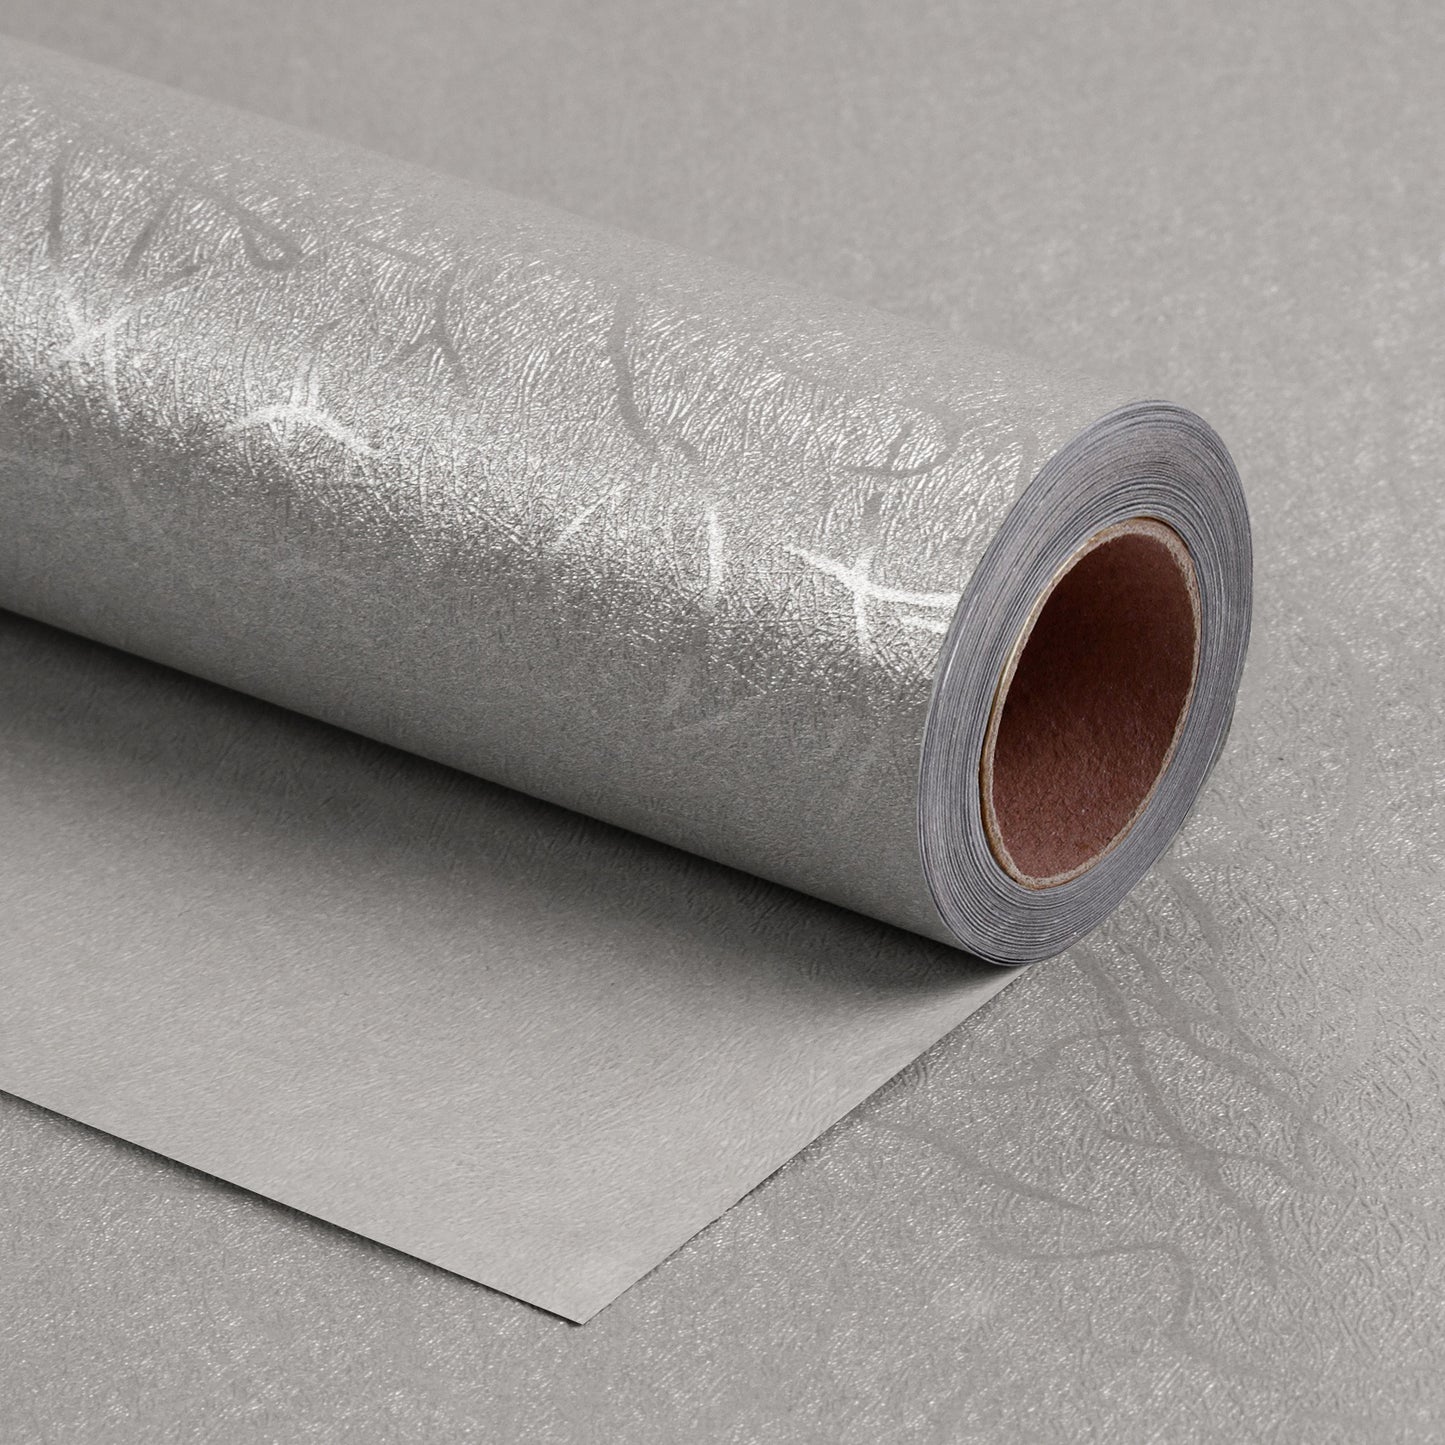 Embossed Lenny Grain Wrapping Paper Roll Silver Ream Wholesale Wrapaholic